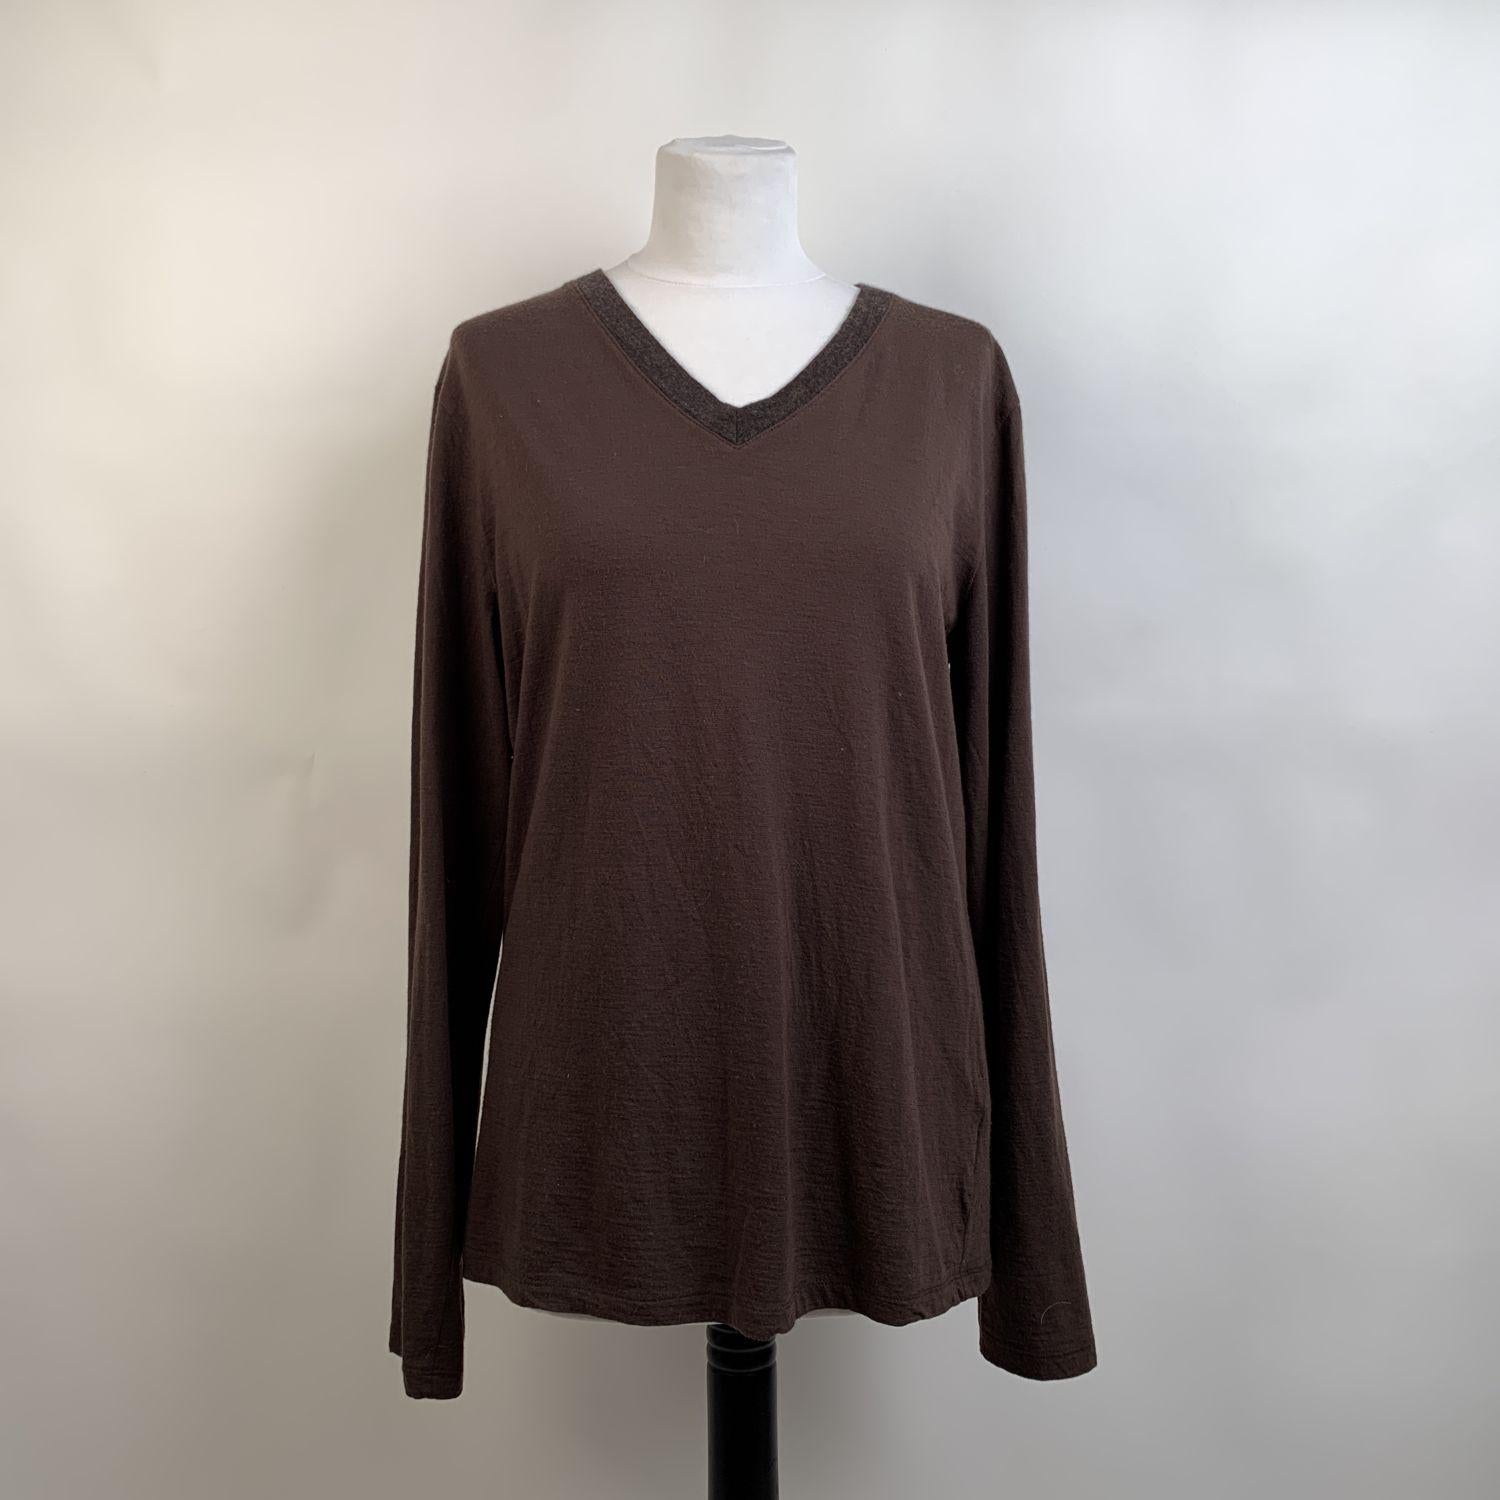 Long sleeve styling Miu Miu jumper. Featuring V neckline with gray contrast trim in wool. Brown color. Composition: 88% wool, 12% nylon. Size: Large (but it fits smaller. it should correspond to a MEDIUM size)



Details

MATERIAL: Wool